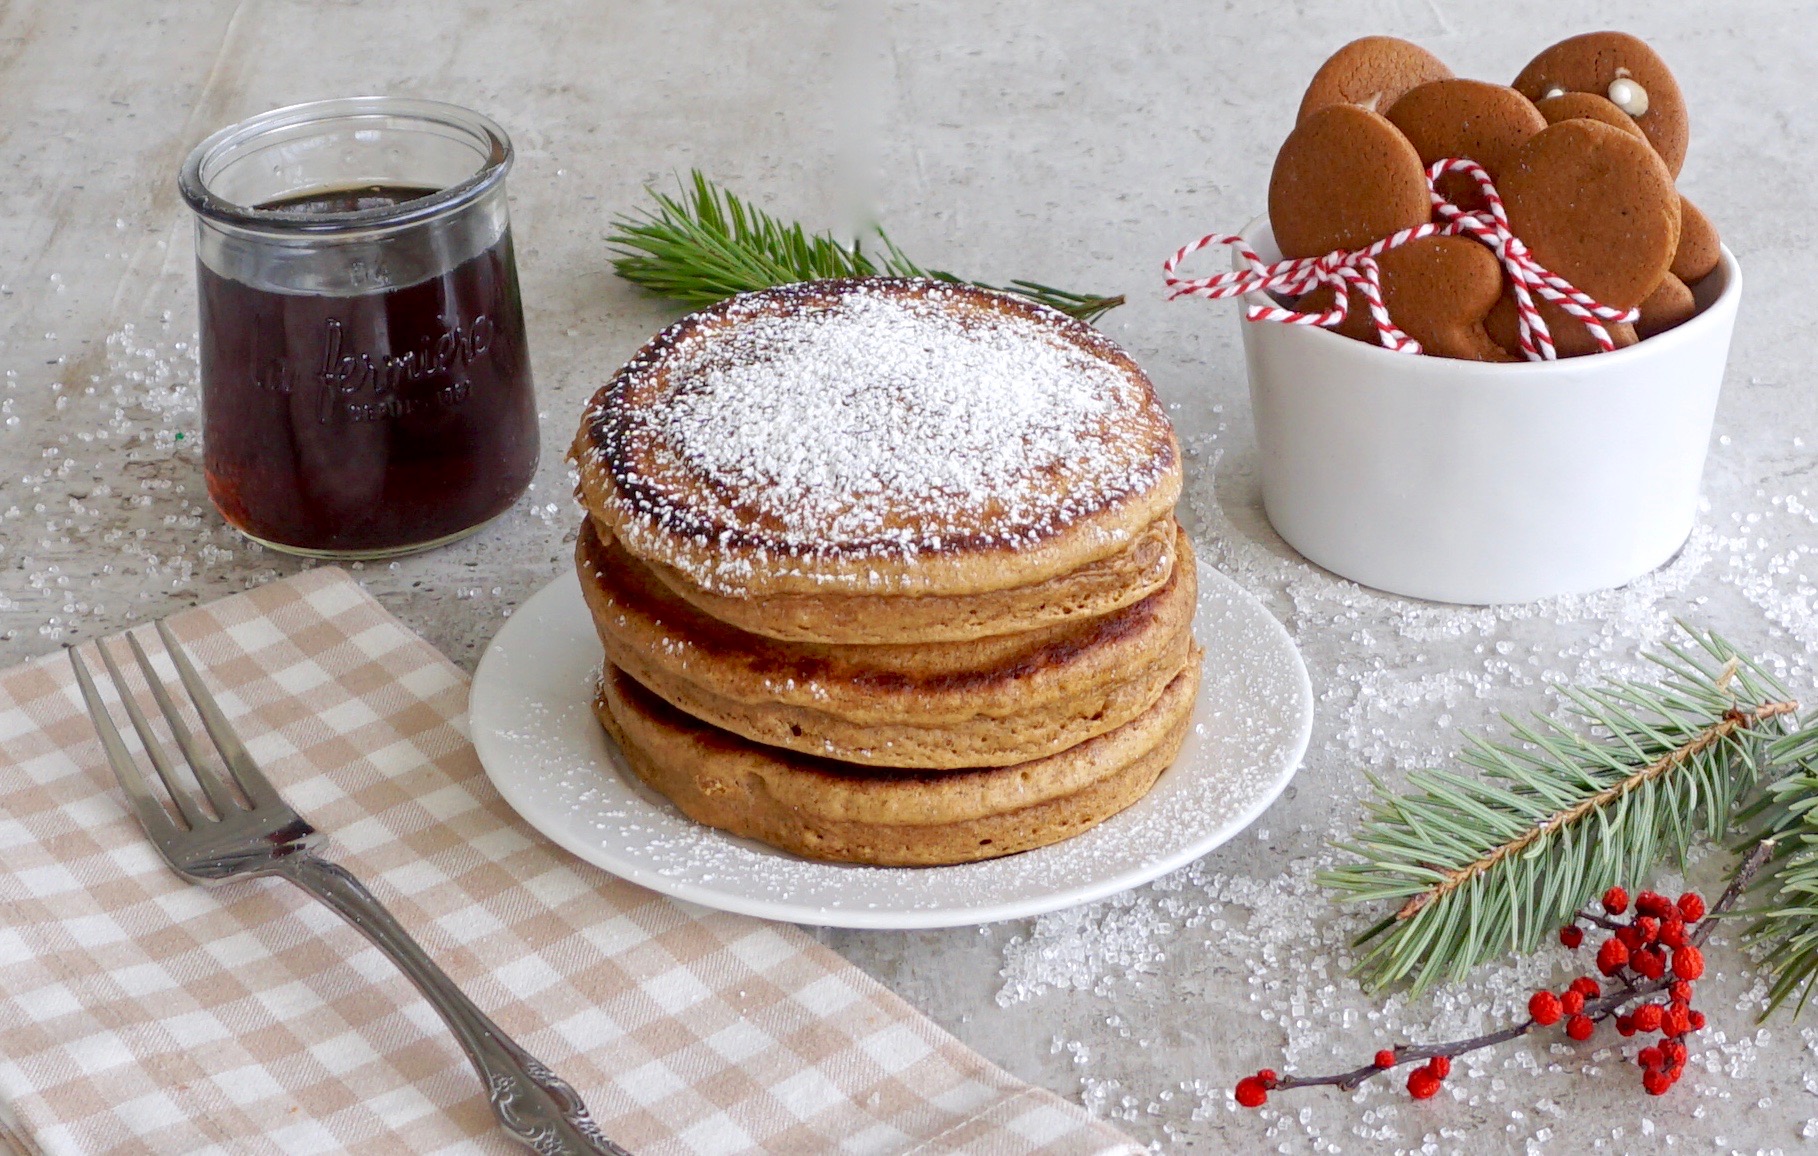 Gingerbread Pancakes have all the flavors of the cookies.